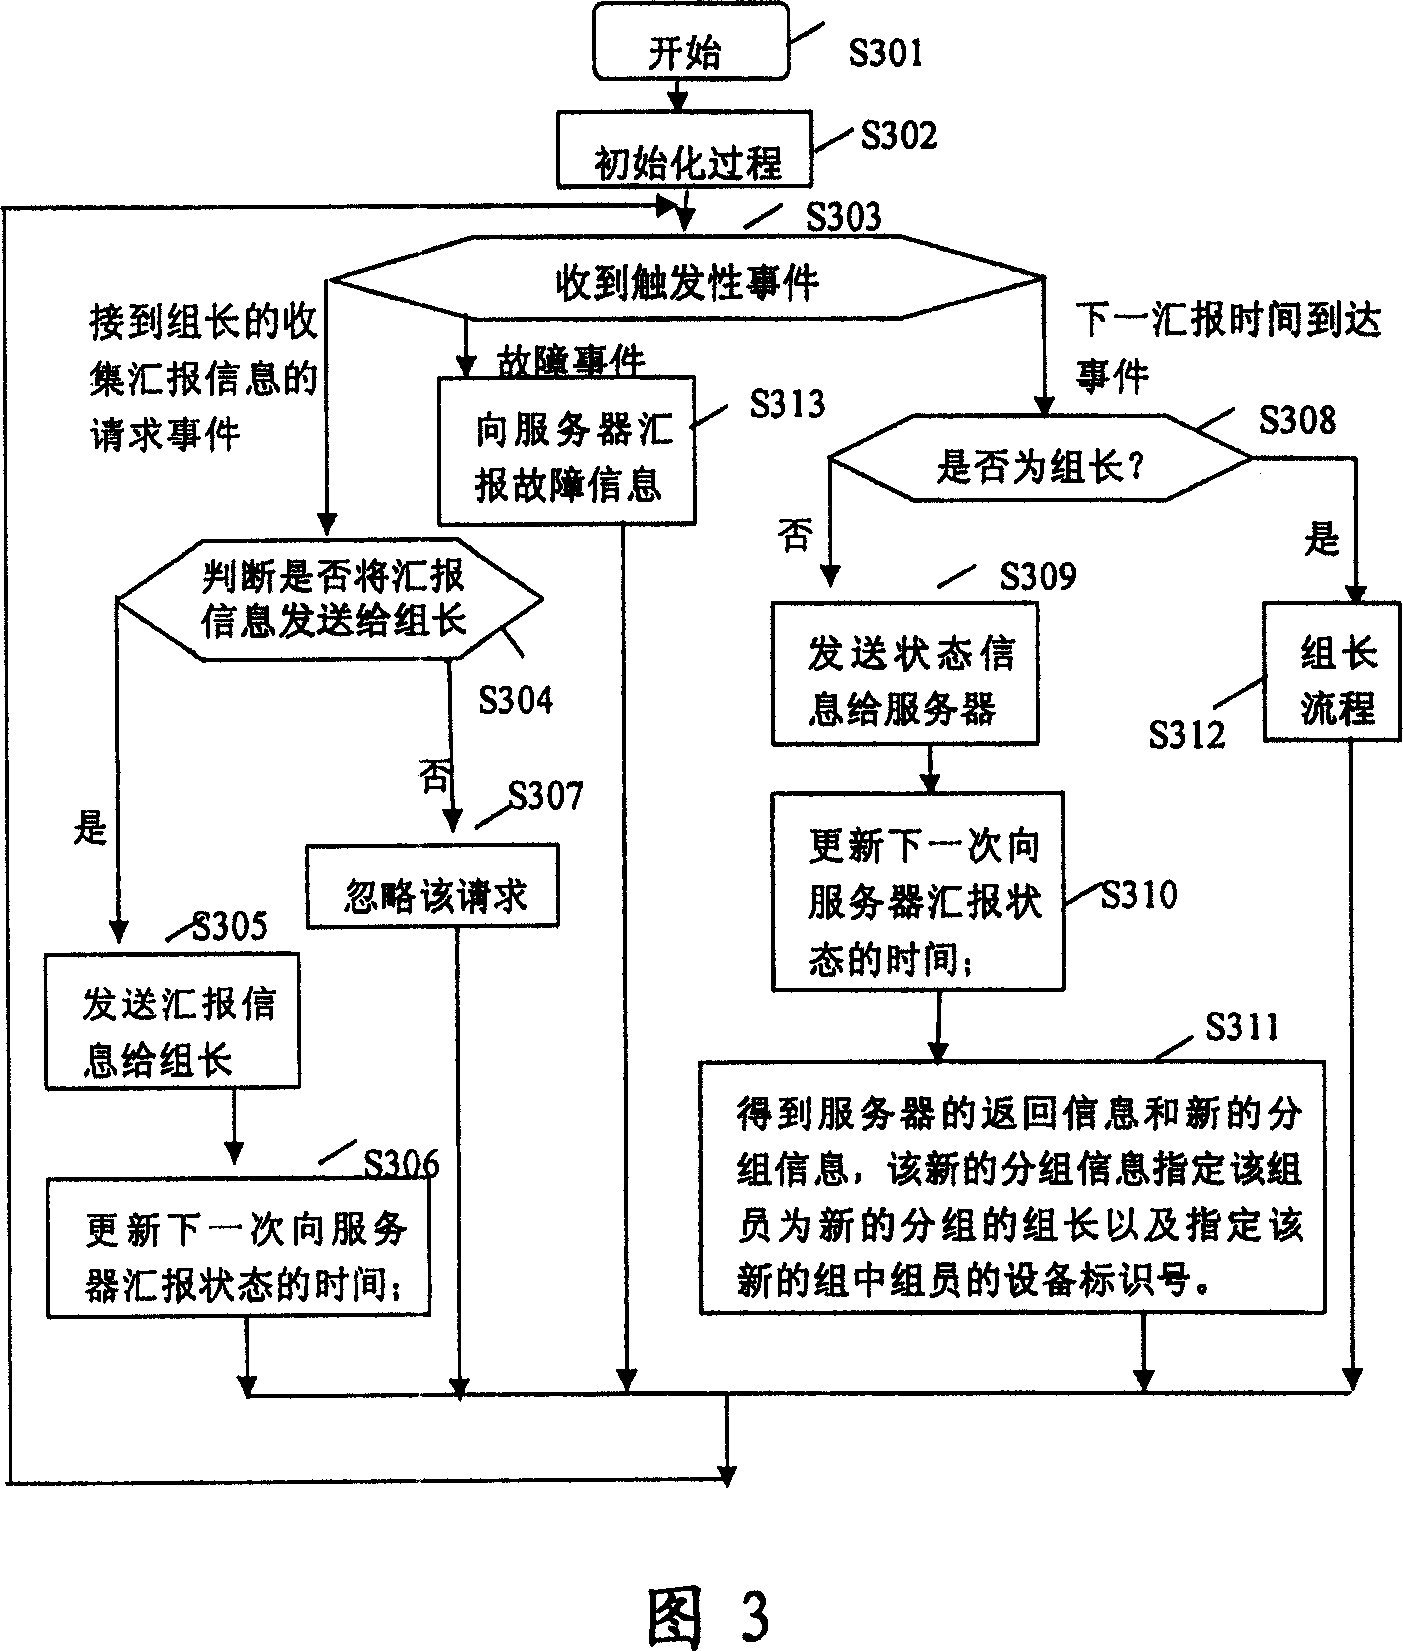 Distributed equipment monitor management method, equipment and system